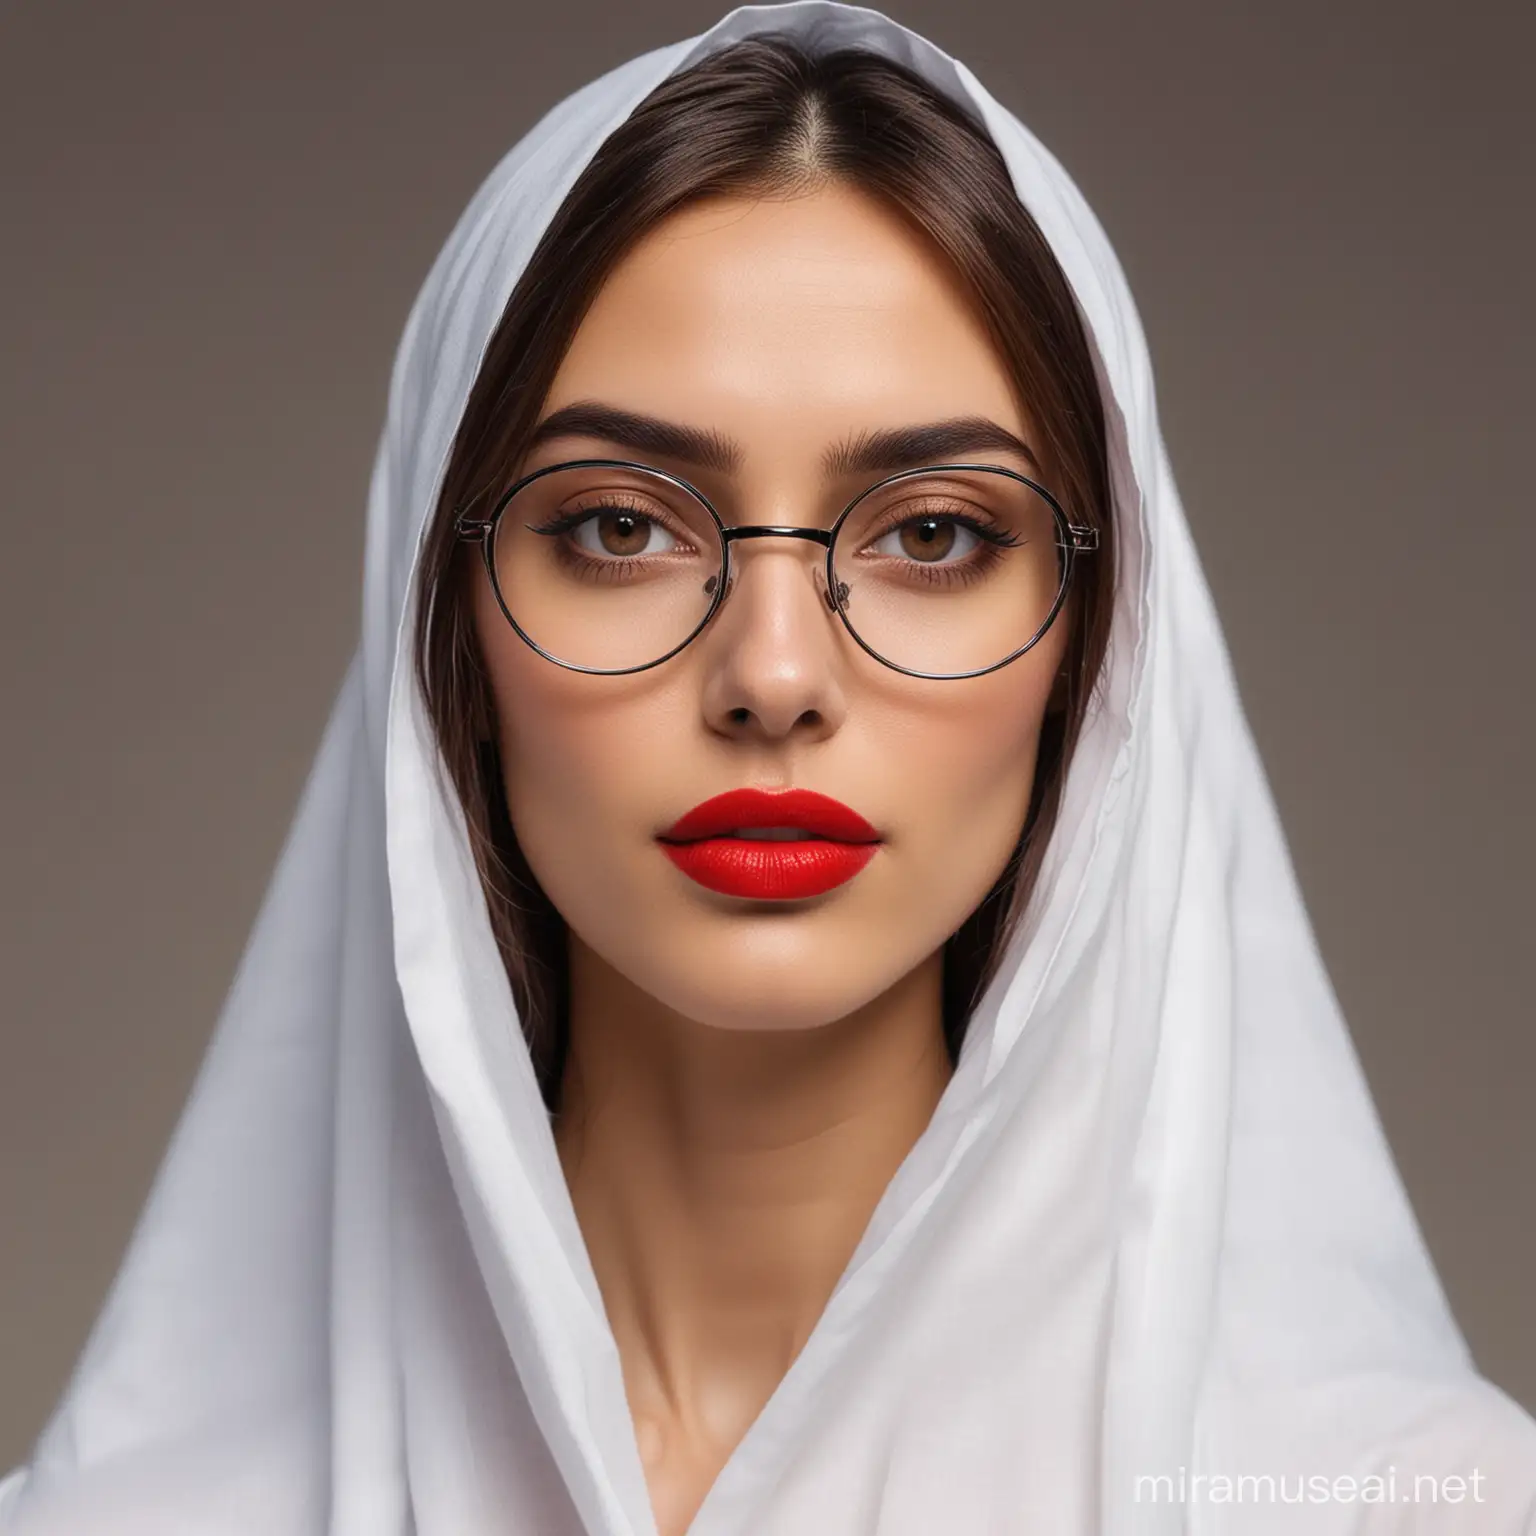 A woman,chador, brown long hair, big wyes, tall forehead, red lips, wearing glasses, slender mandible, thin and skinny